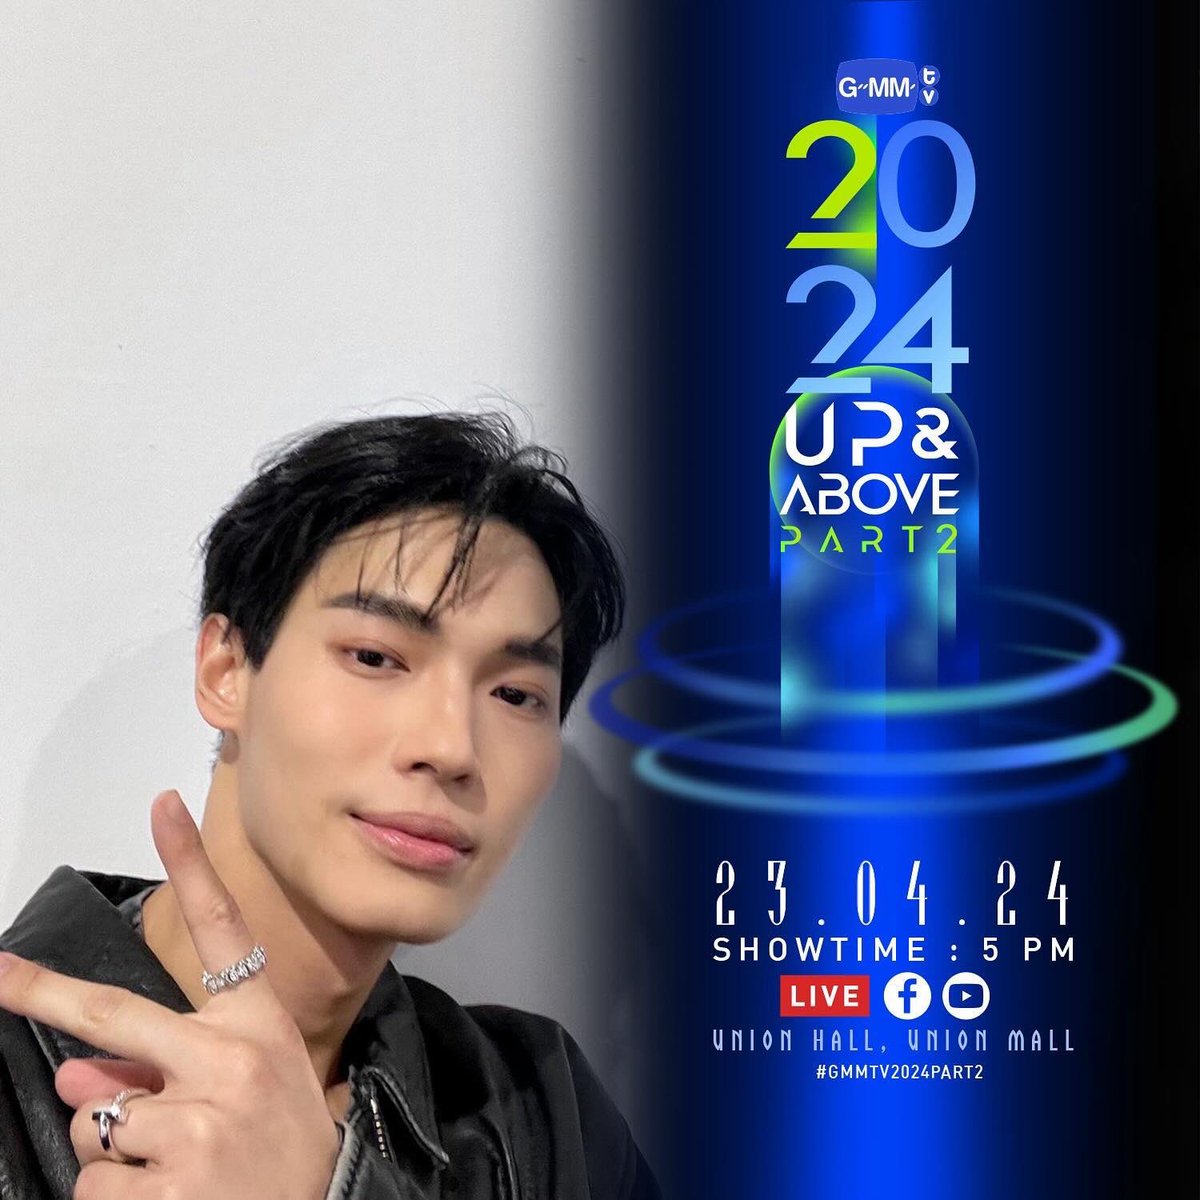 Ig winmetawin update GMMTV2024 UP&ABOVE PART2 เตรียมพบกับงานแถลงข่าวเปิดตัวคอนเทนต์ของ GMMTV ในปี 2024 ส่วนที่ 2 23.04.24 SHOWTIME : 5 PM WE ARE GOING LIVE 5 PM [Bangkok Time] VENUE : Union Hall, Union Mall 🔗 Please go to the below link to Like, Share and Comment ⬇️…